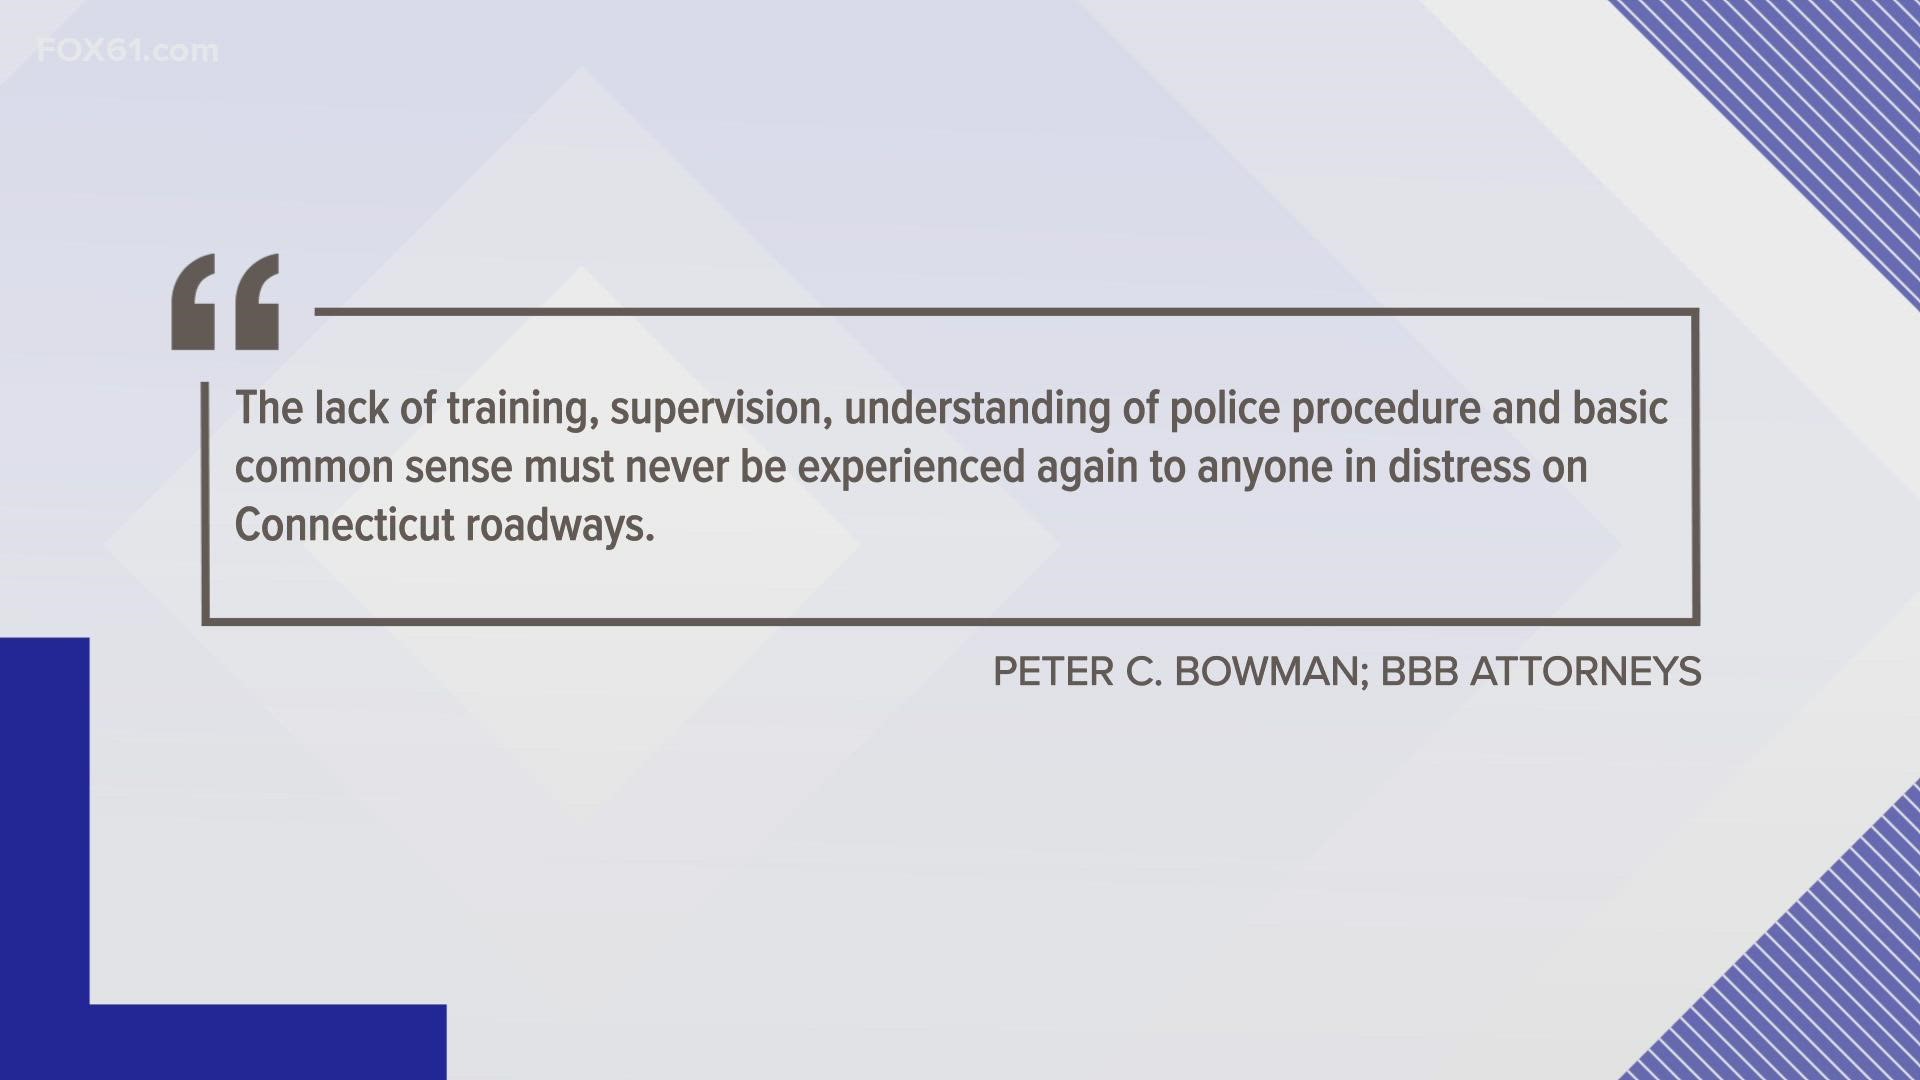 Claims police have a lack of training and police procedure